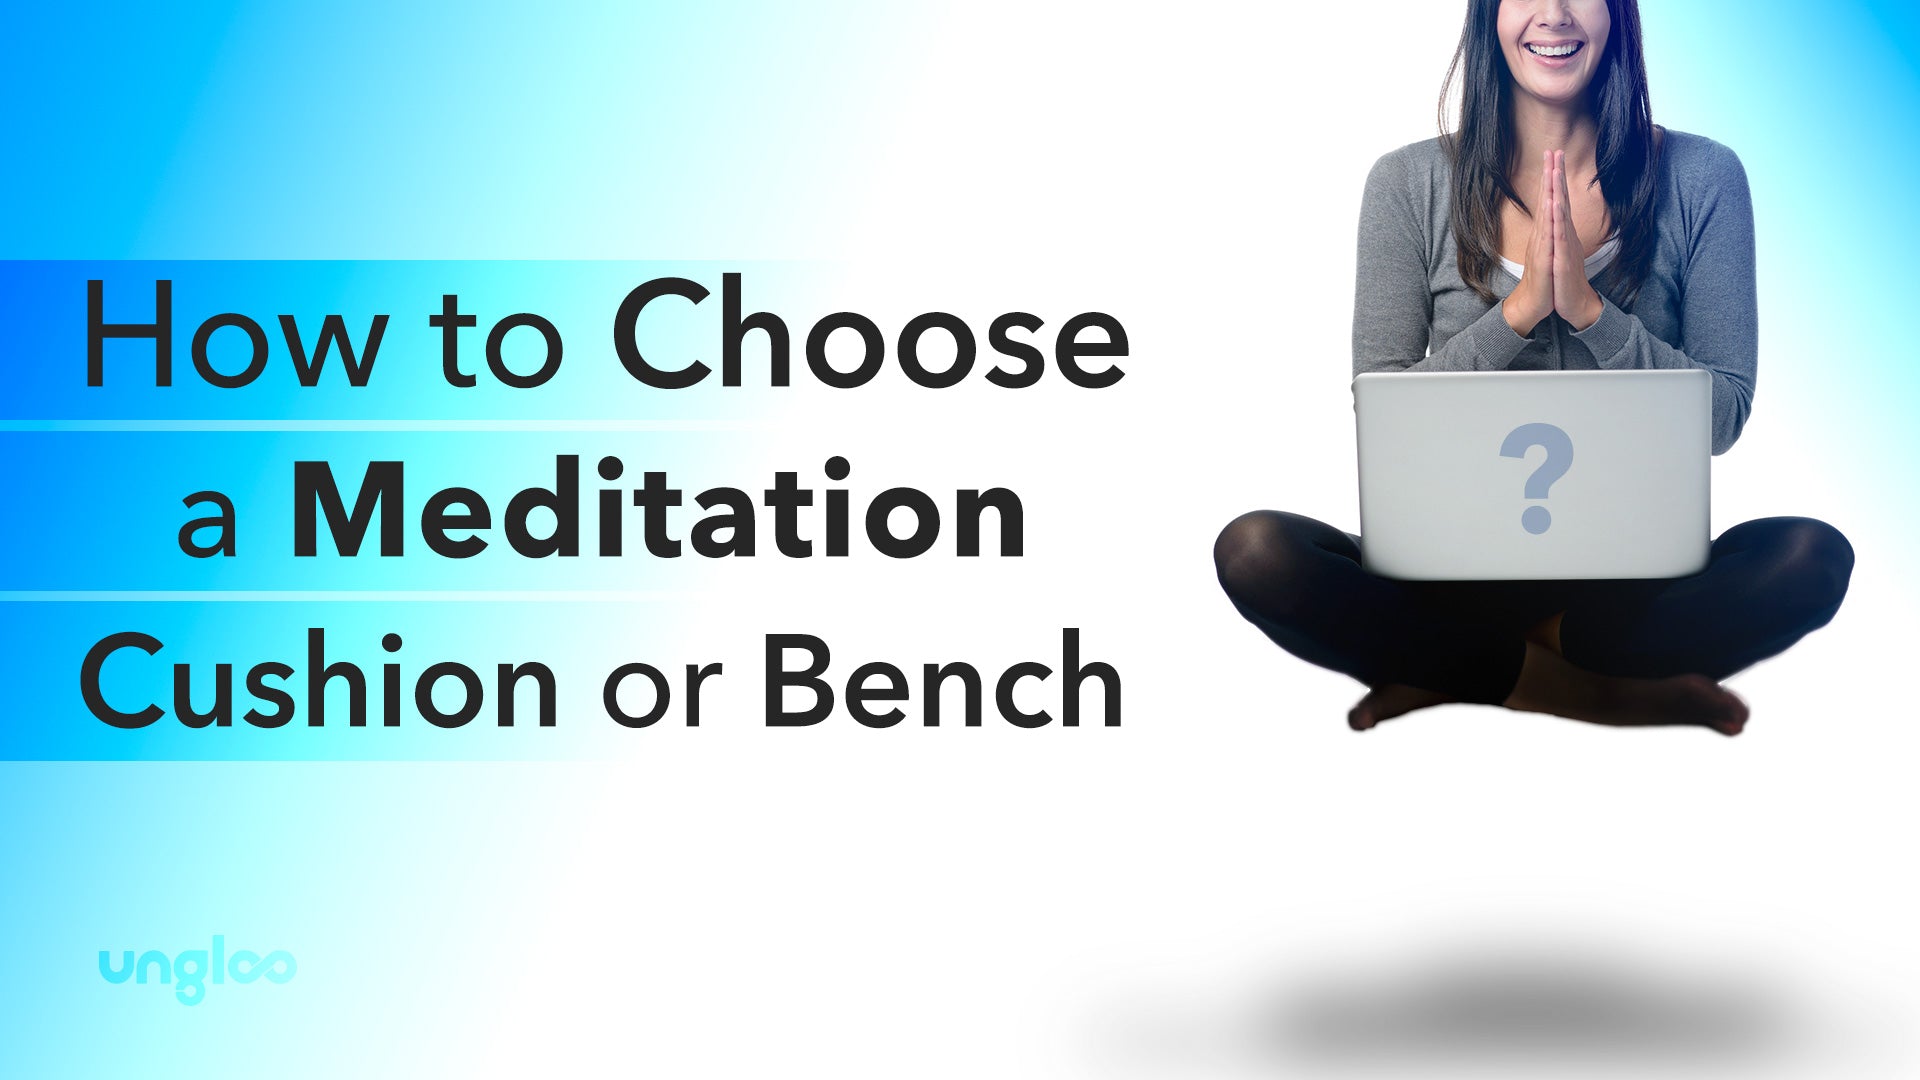 Woman searching online for the best meditation bench